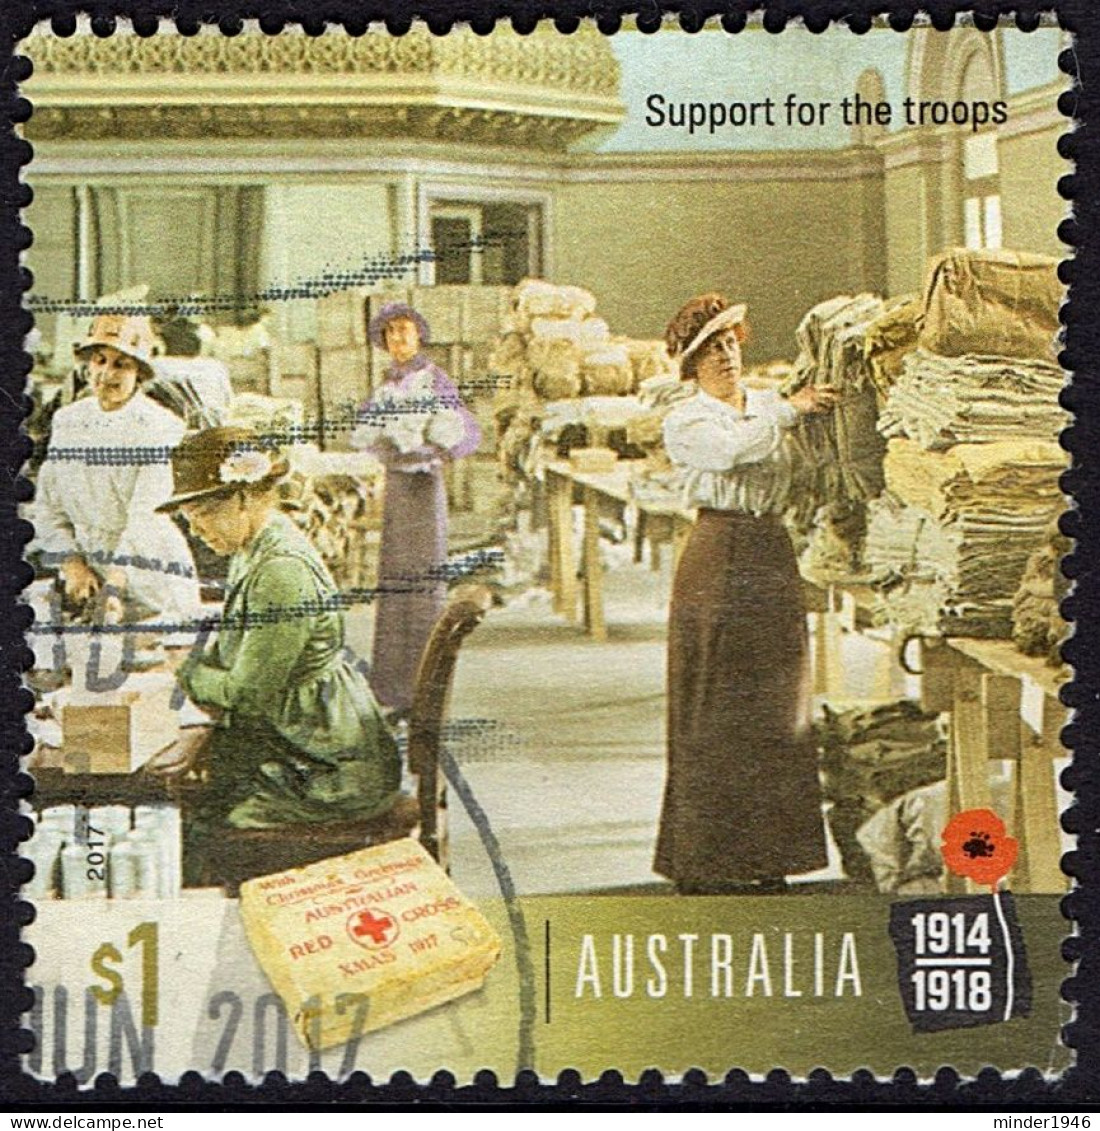 AUSTRALIA 2017 $1 Multicoloured, Centenary Of WWI 1917-Support For The Troops Used - Used Stamps